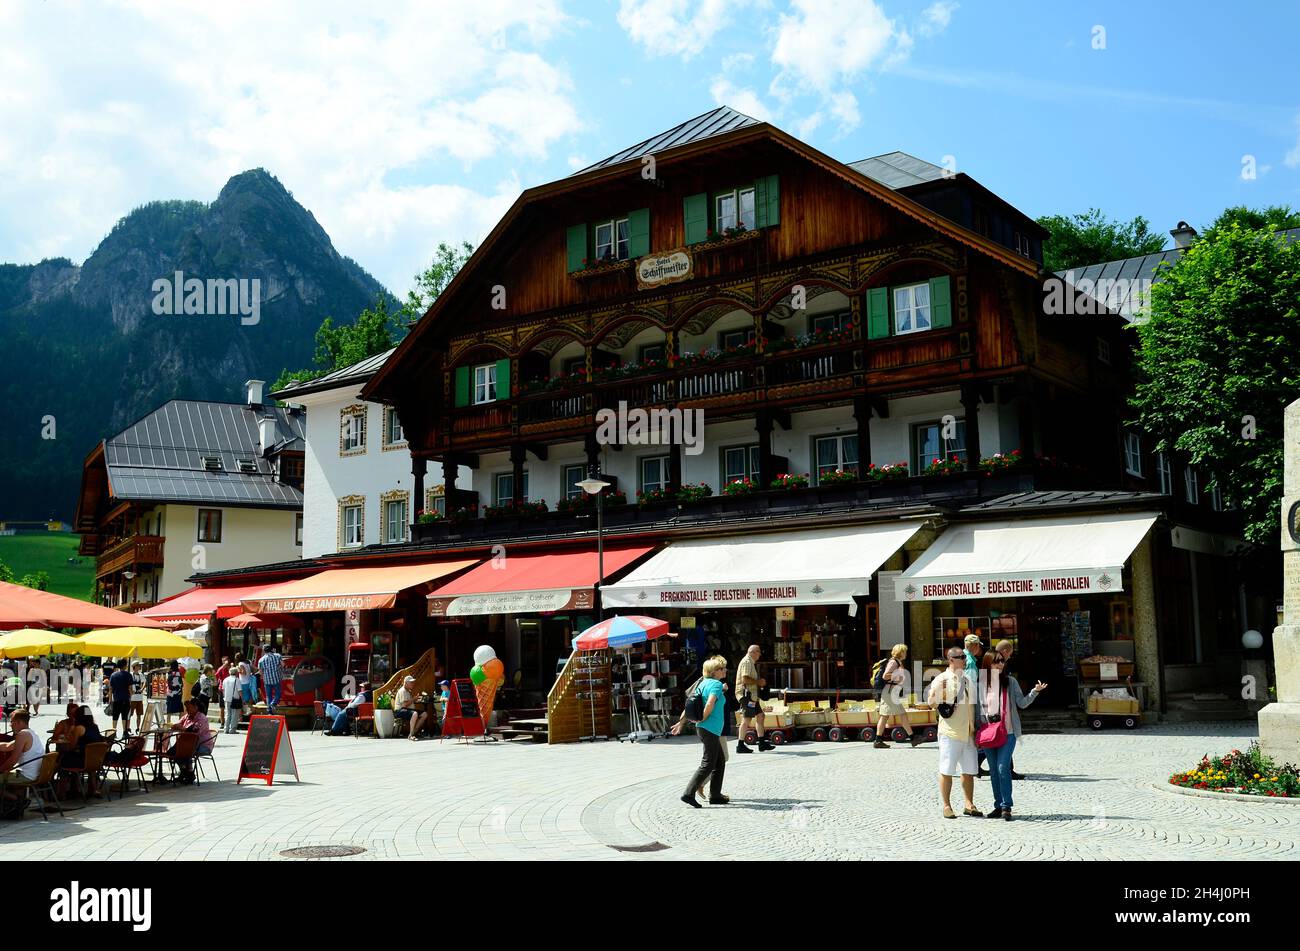 Berchtesgaden, Germany - June 12, 2015: Unidentified tourists, hotel, restaurant and souvenir shops on Koenigssee lake in Bavaria Stock Photo